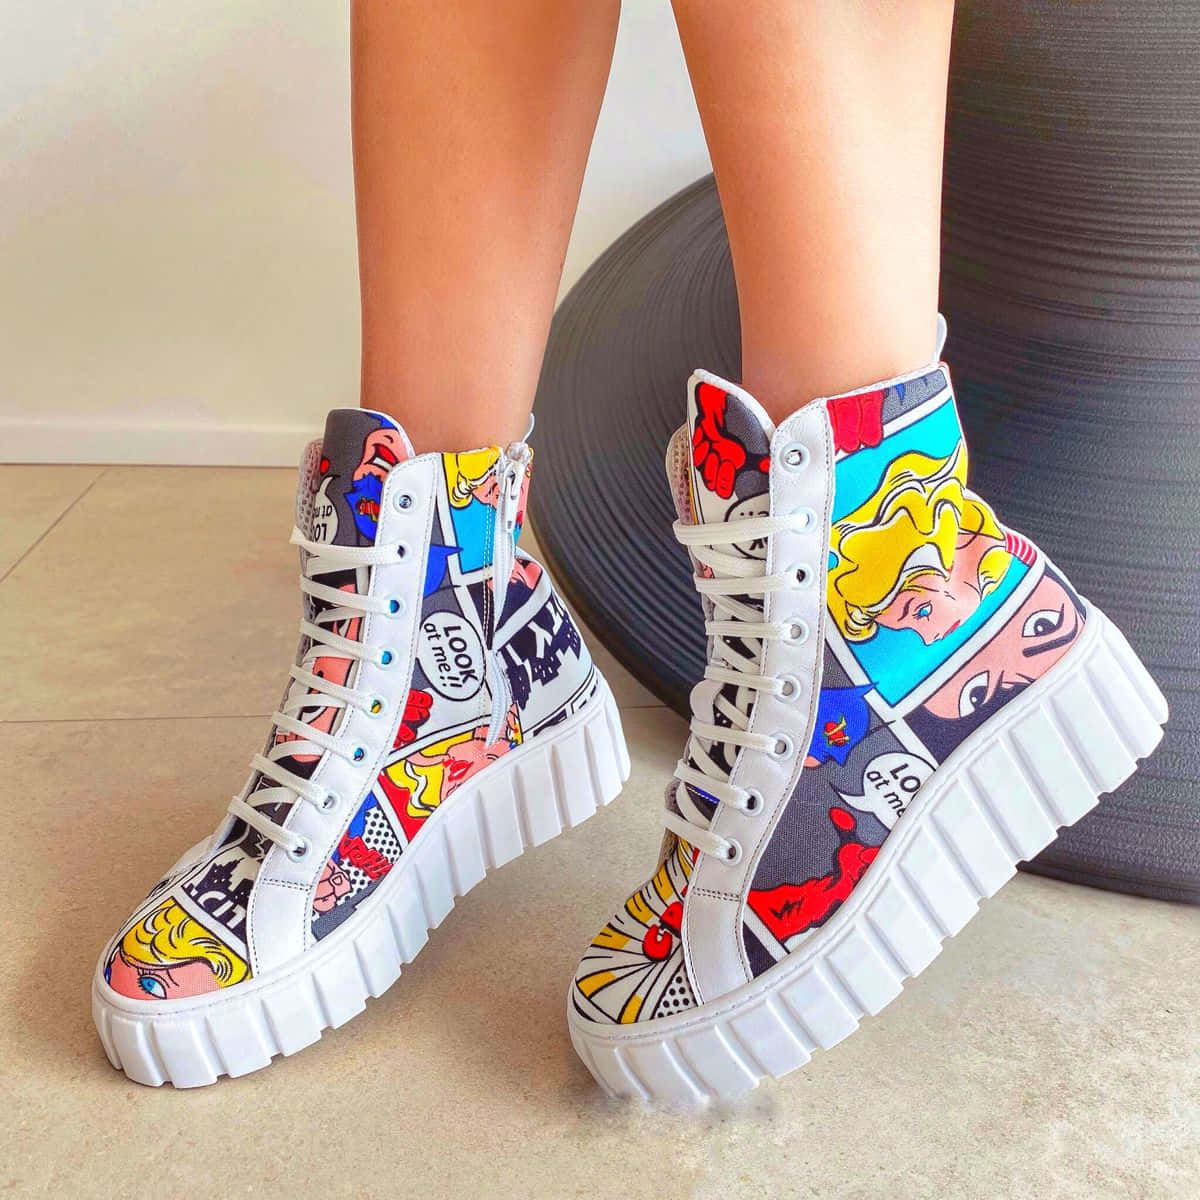 A Woman Wearing Colorful Sneakers With A Cartoon Design